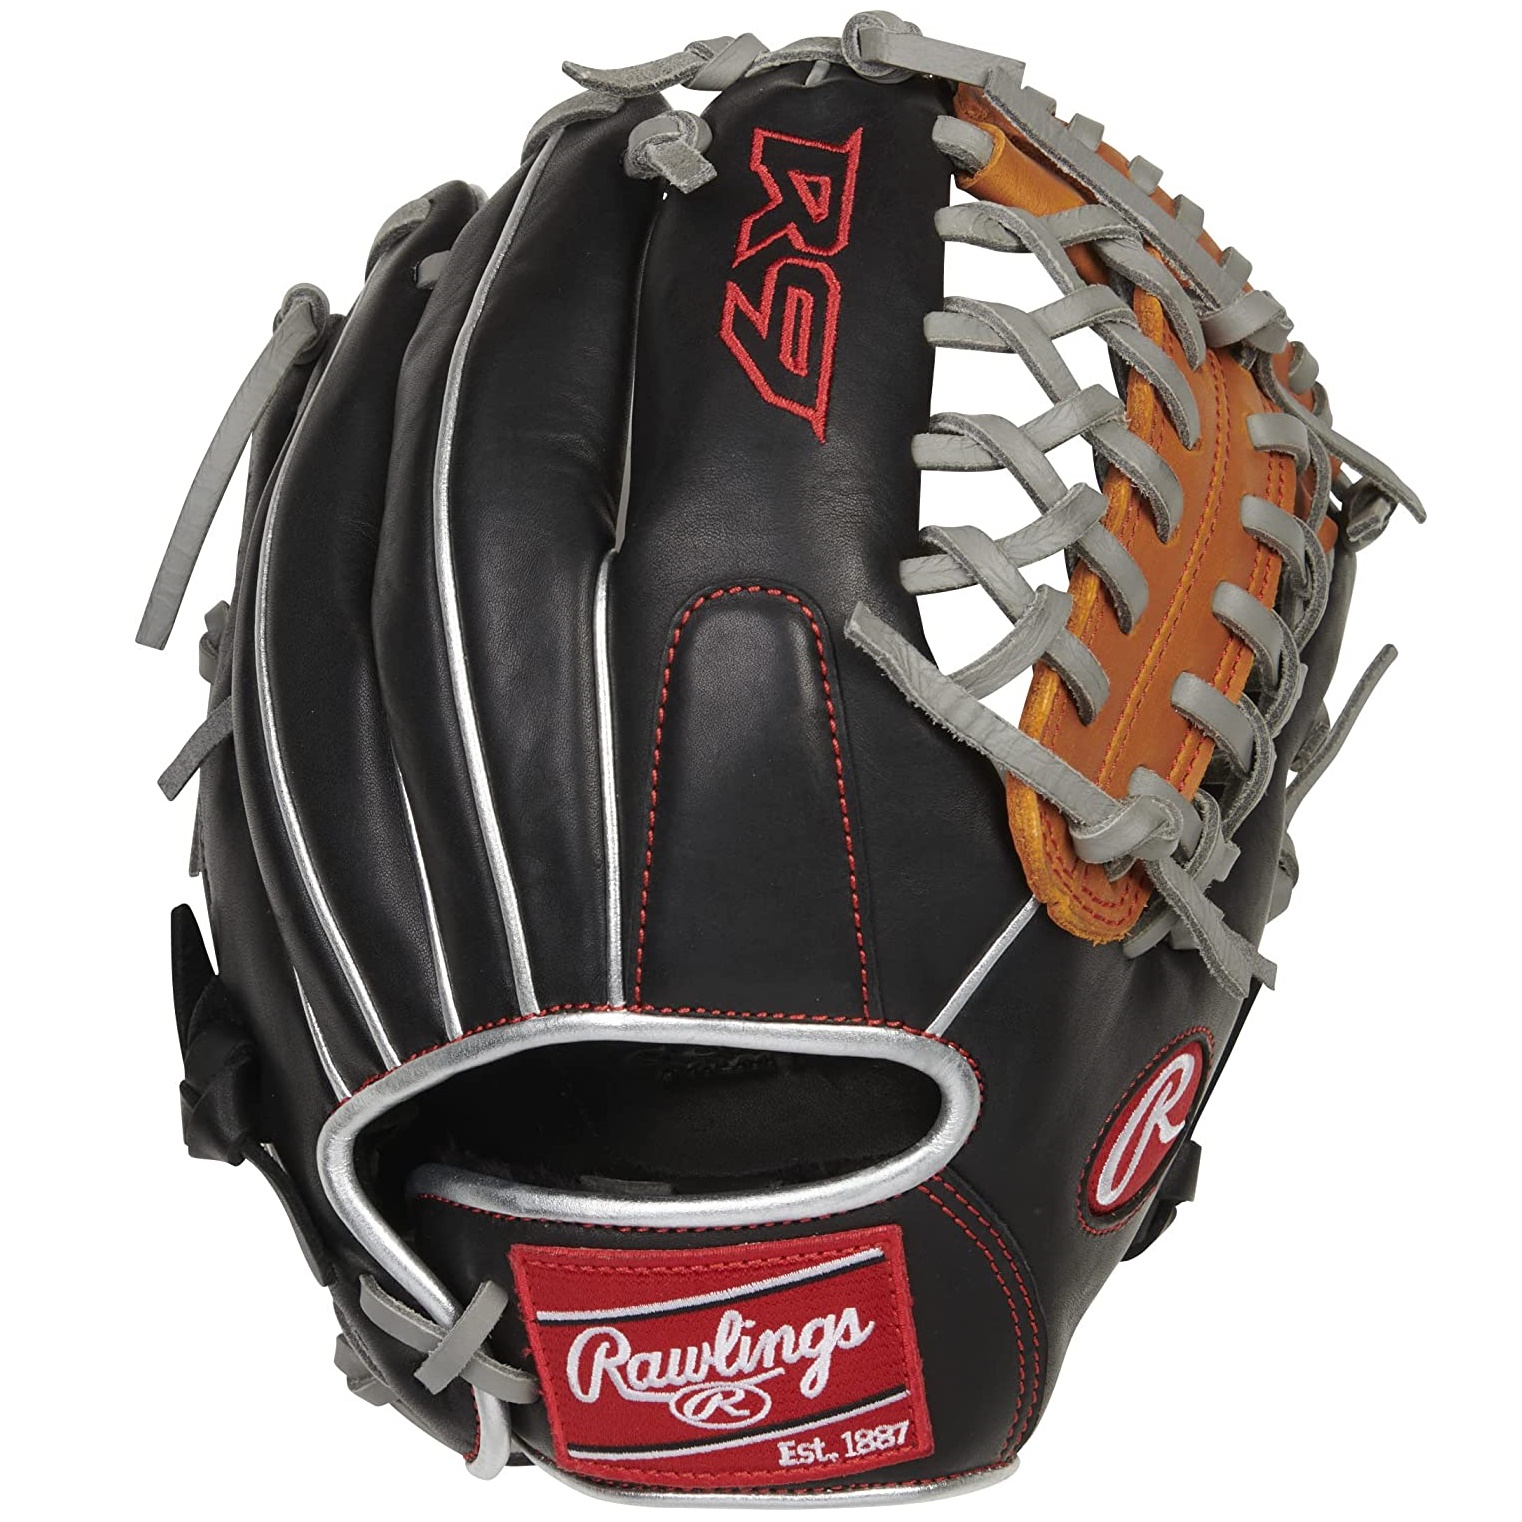 Contour Fit  Narrow Finger Stalls Lowered Finger Stalls Smaller Wrist Opening Adjusted Back Opening  Youth Glove Ages 8 and Up  Soft, durable all-leather shell Pro Patterns help you play like a pro Reinforced palm pad and padded thumb Padded fingerback lining for a soft comfortable feel Build for smaller hands, Contour fit specially designed to give you more control and a better feel 